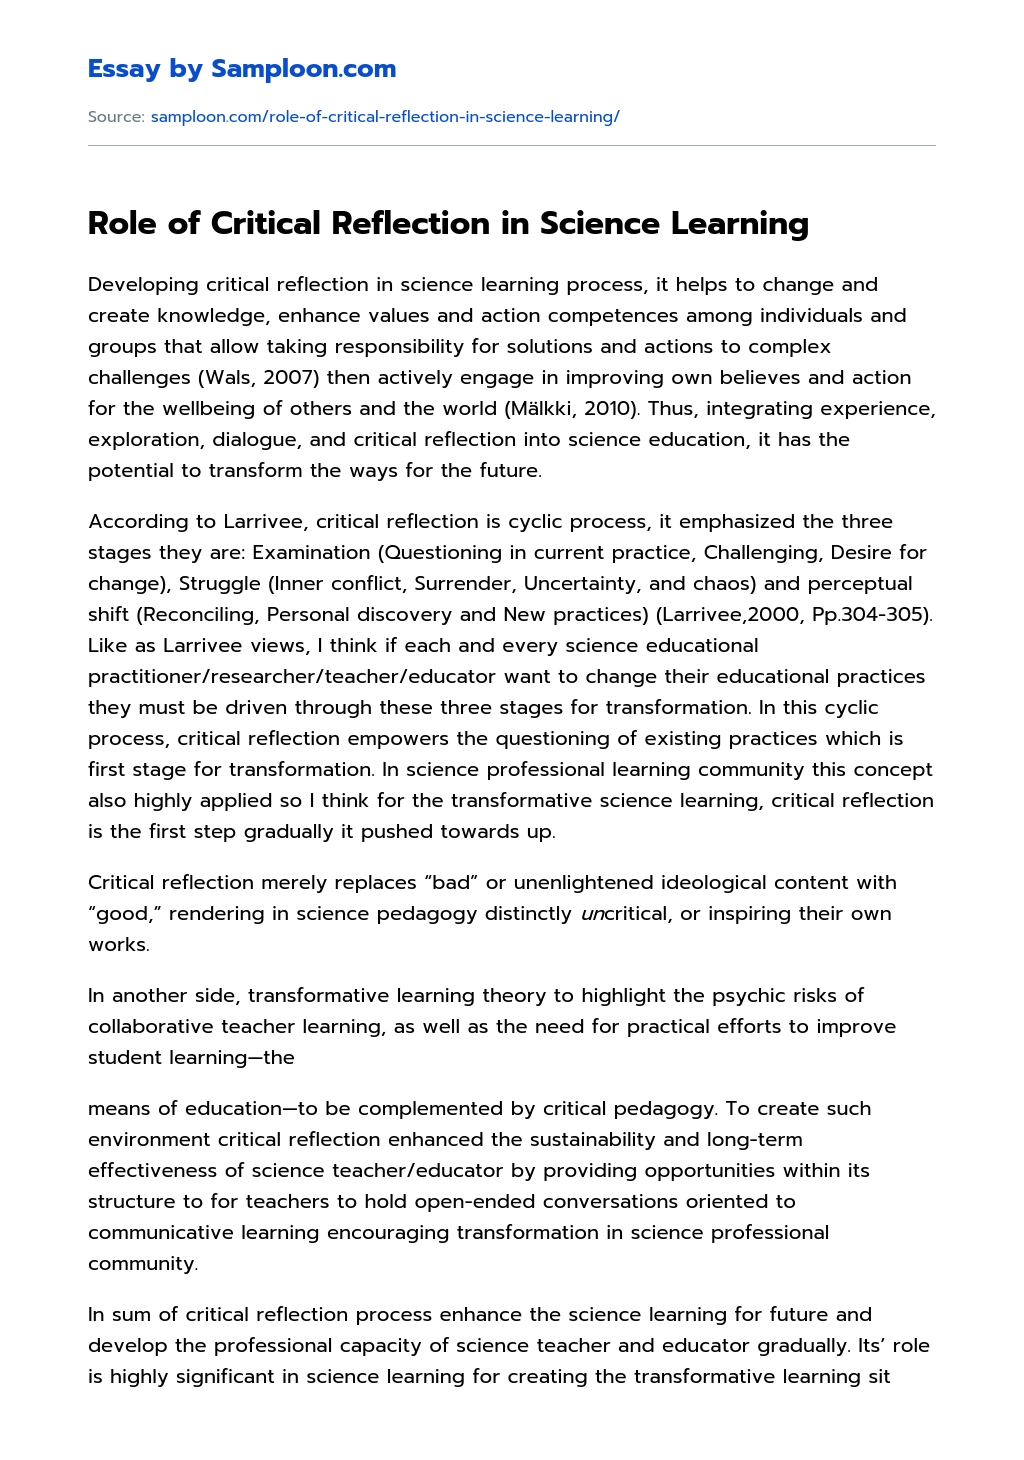 Role of Critical Reflection in Science Learning essay